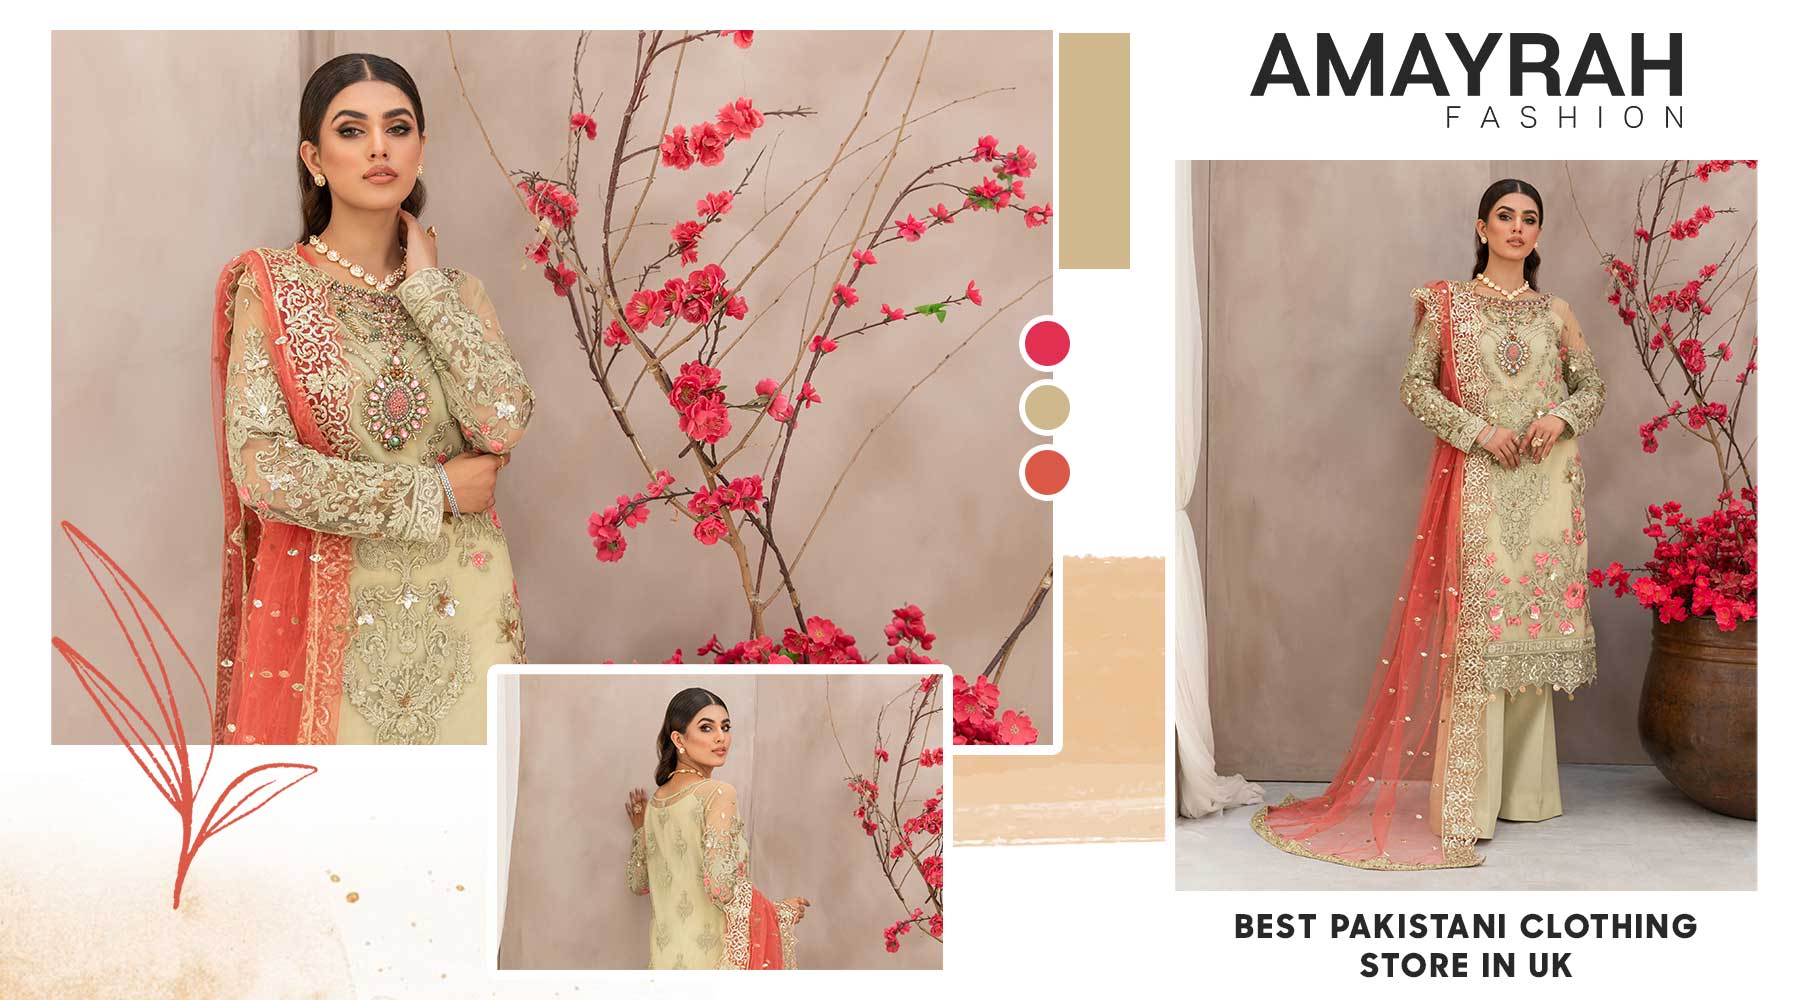 Amayrah Fashion - A Haven for Pakistani Clothing in UK